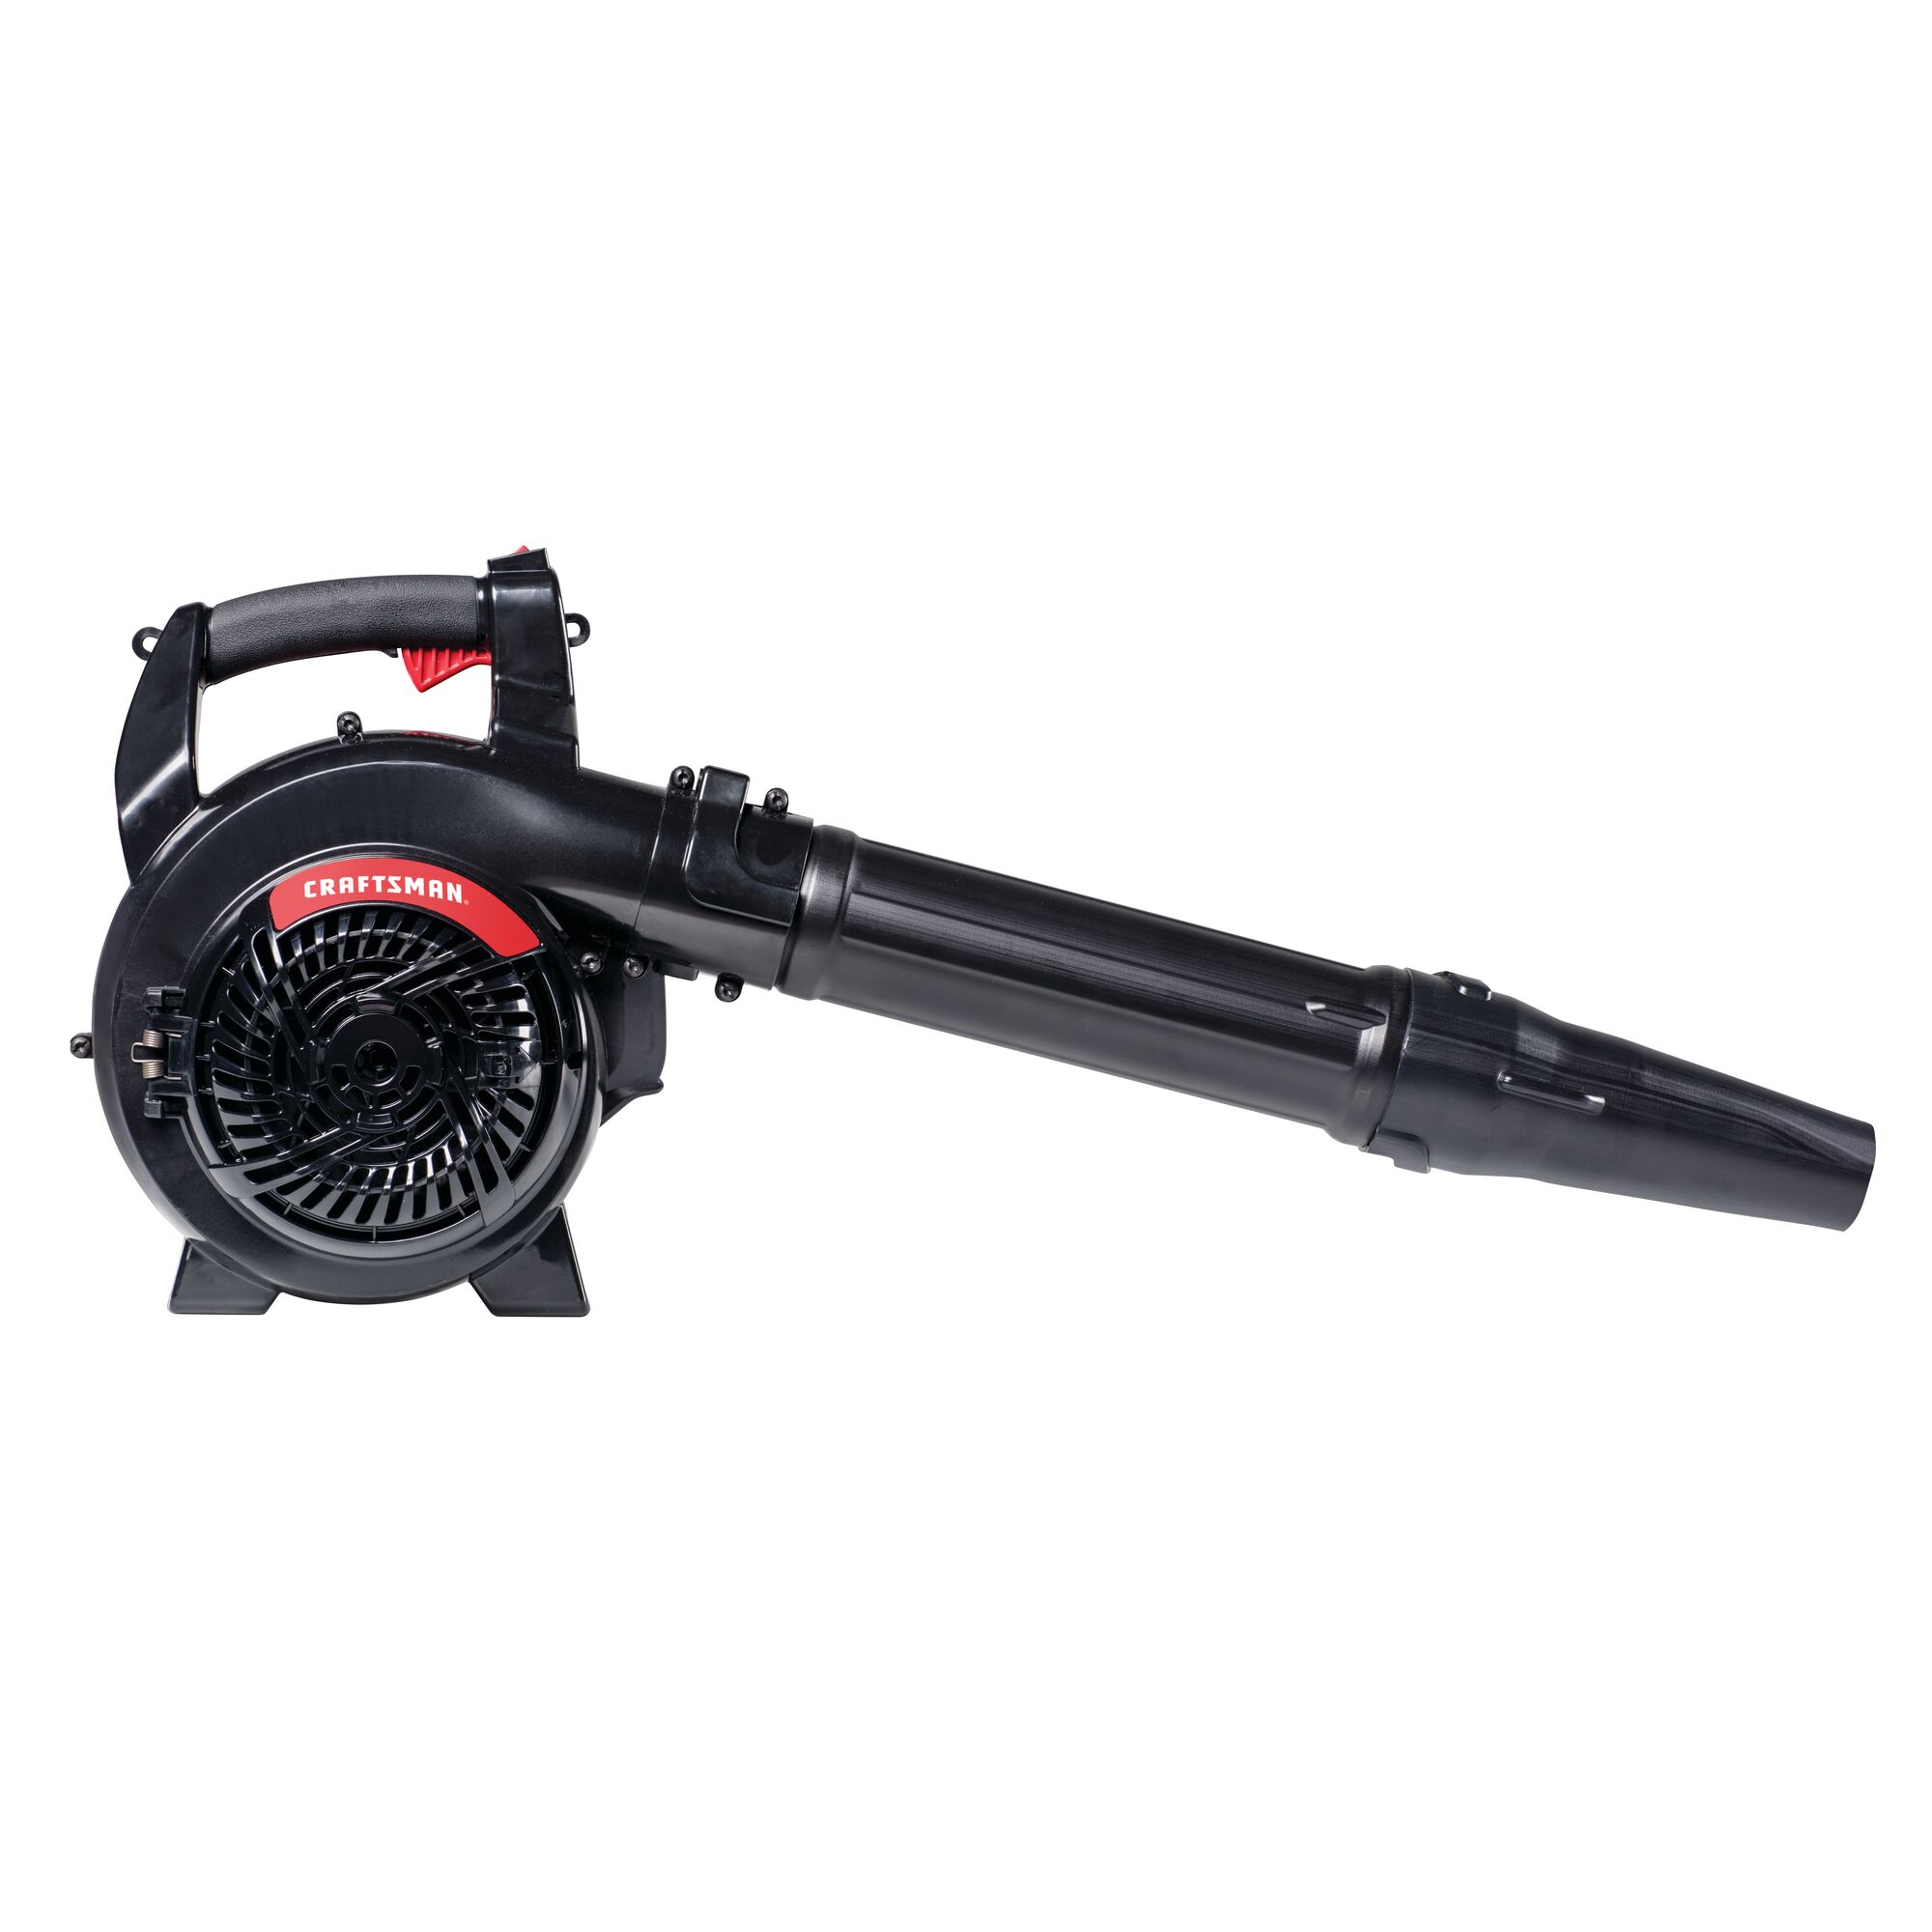 Right profile of 2 cycle full crank engine gas leaf blower vacuum.